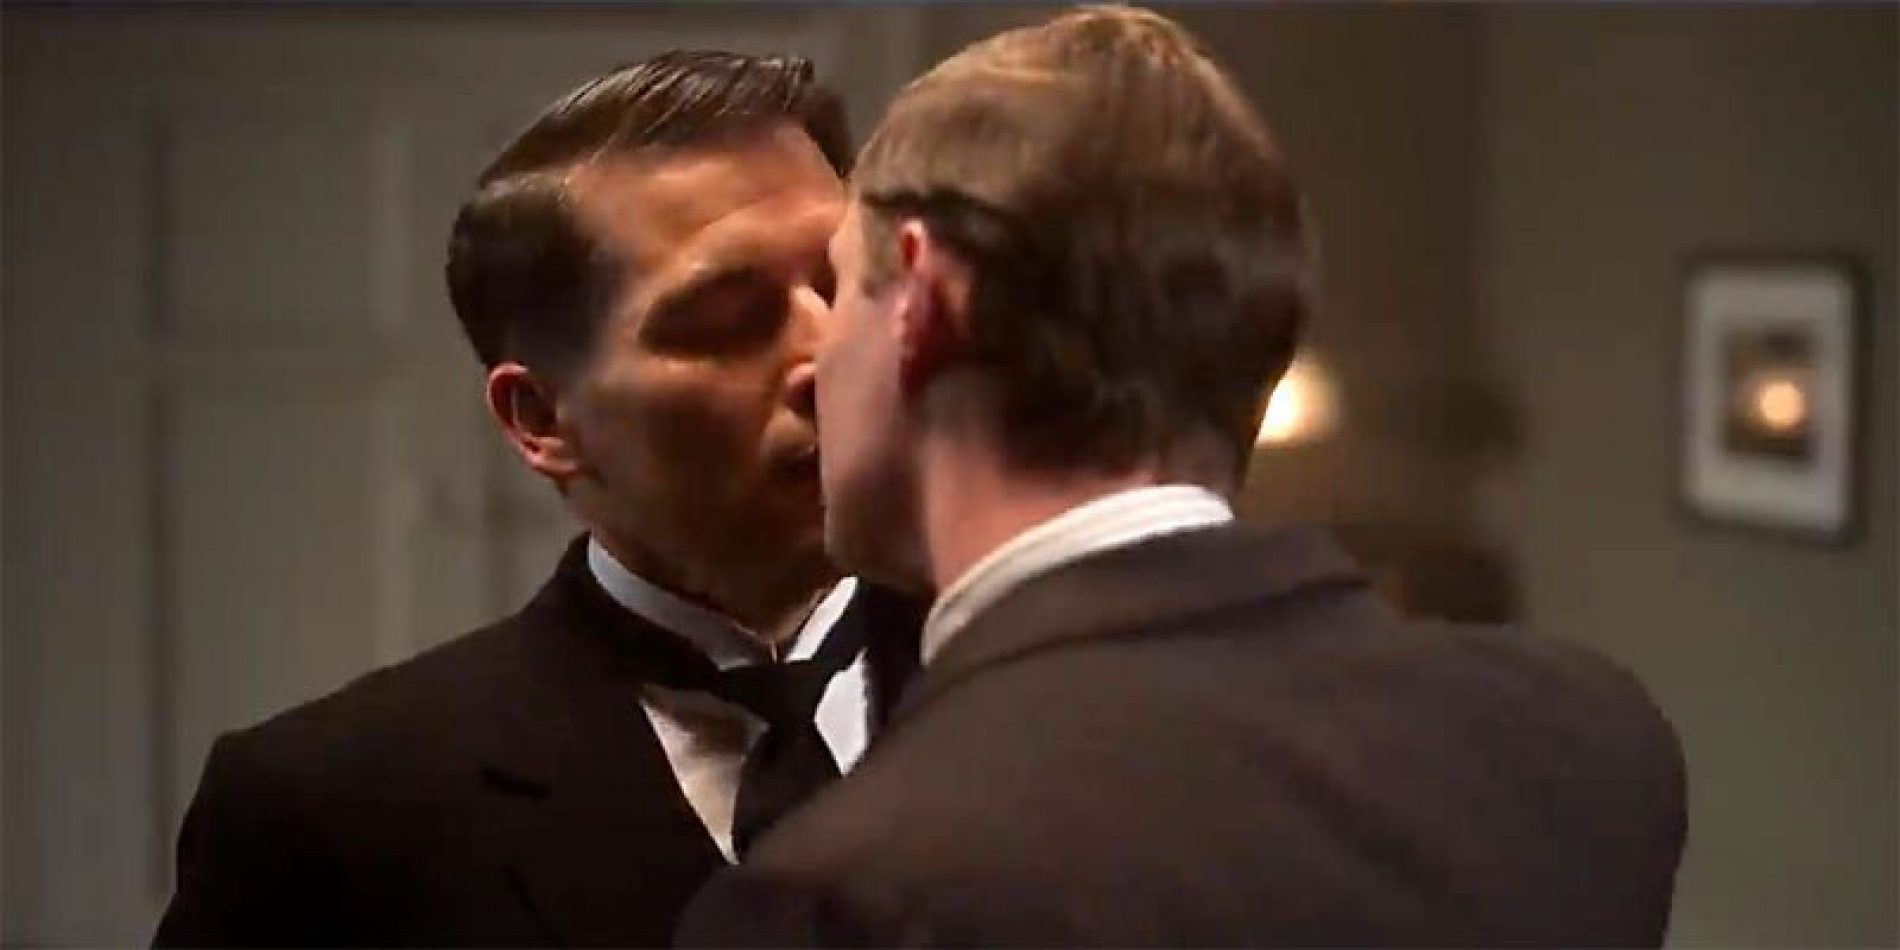 The trailer for the Downton Abbey movie drops, and there’s some same-sex lip-locking